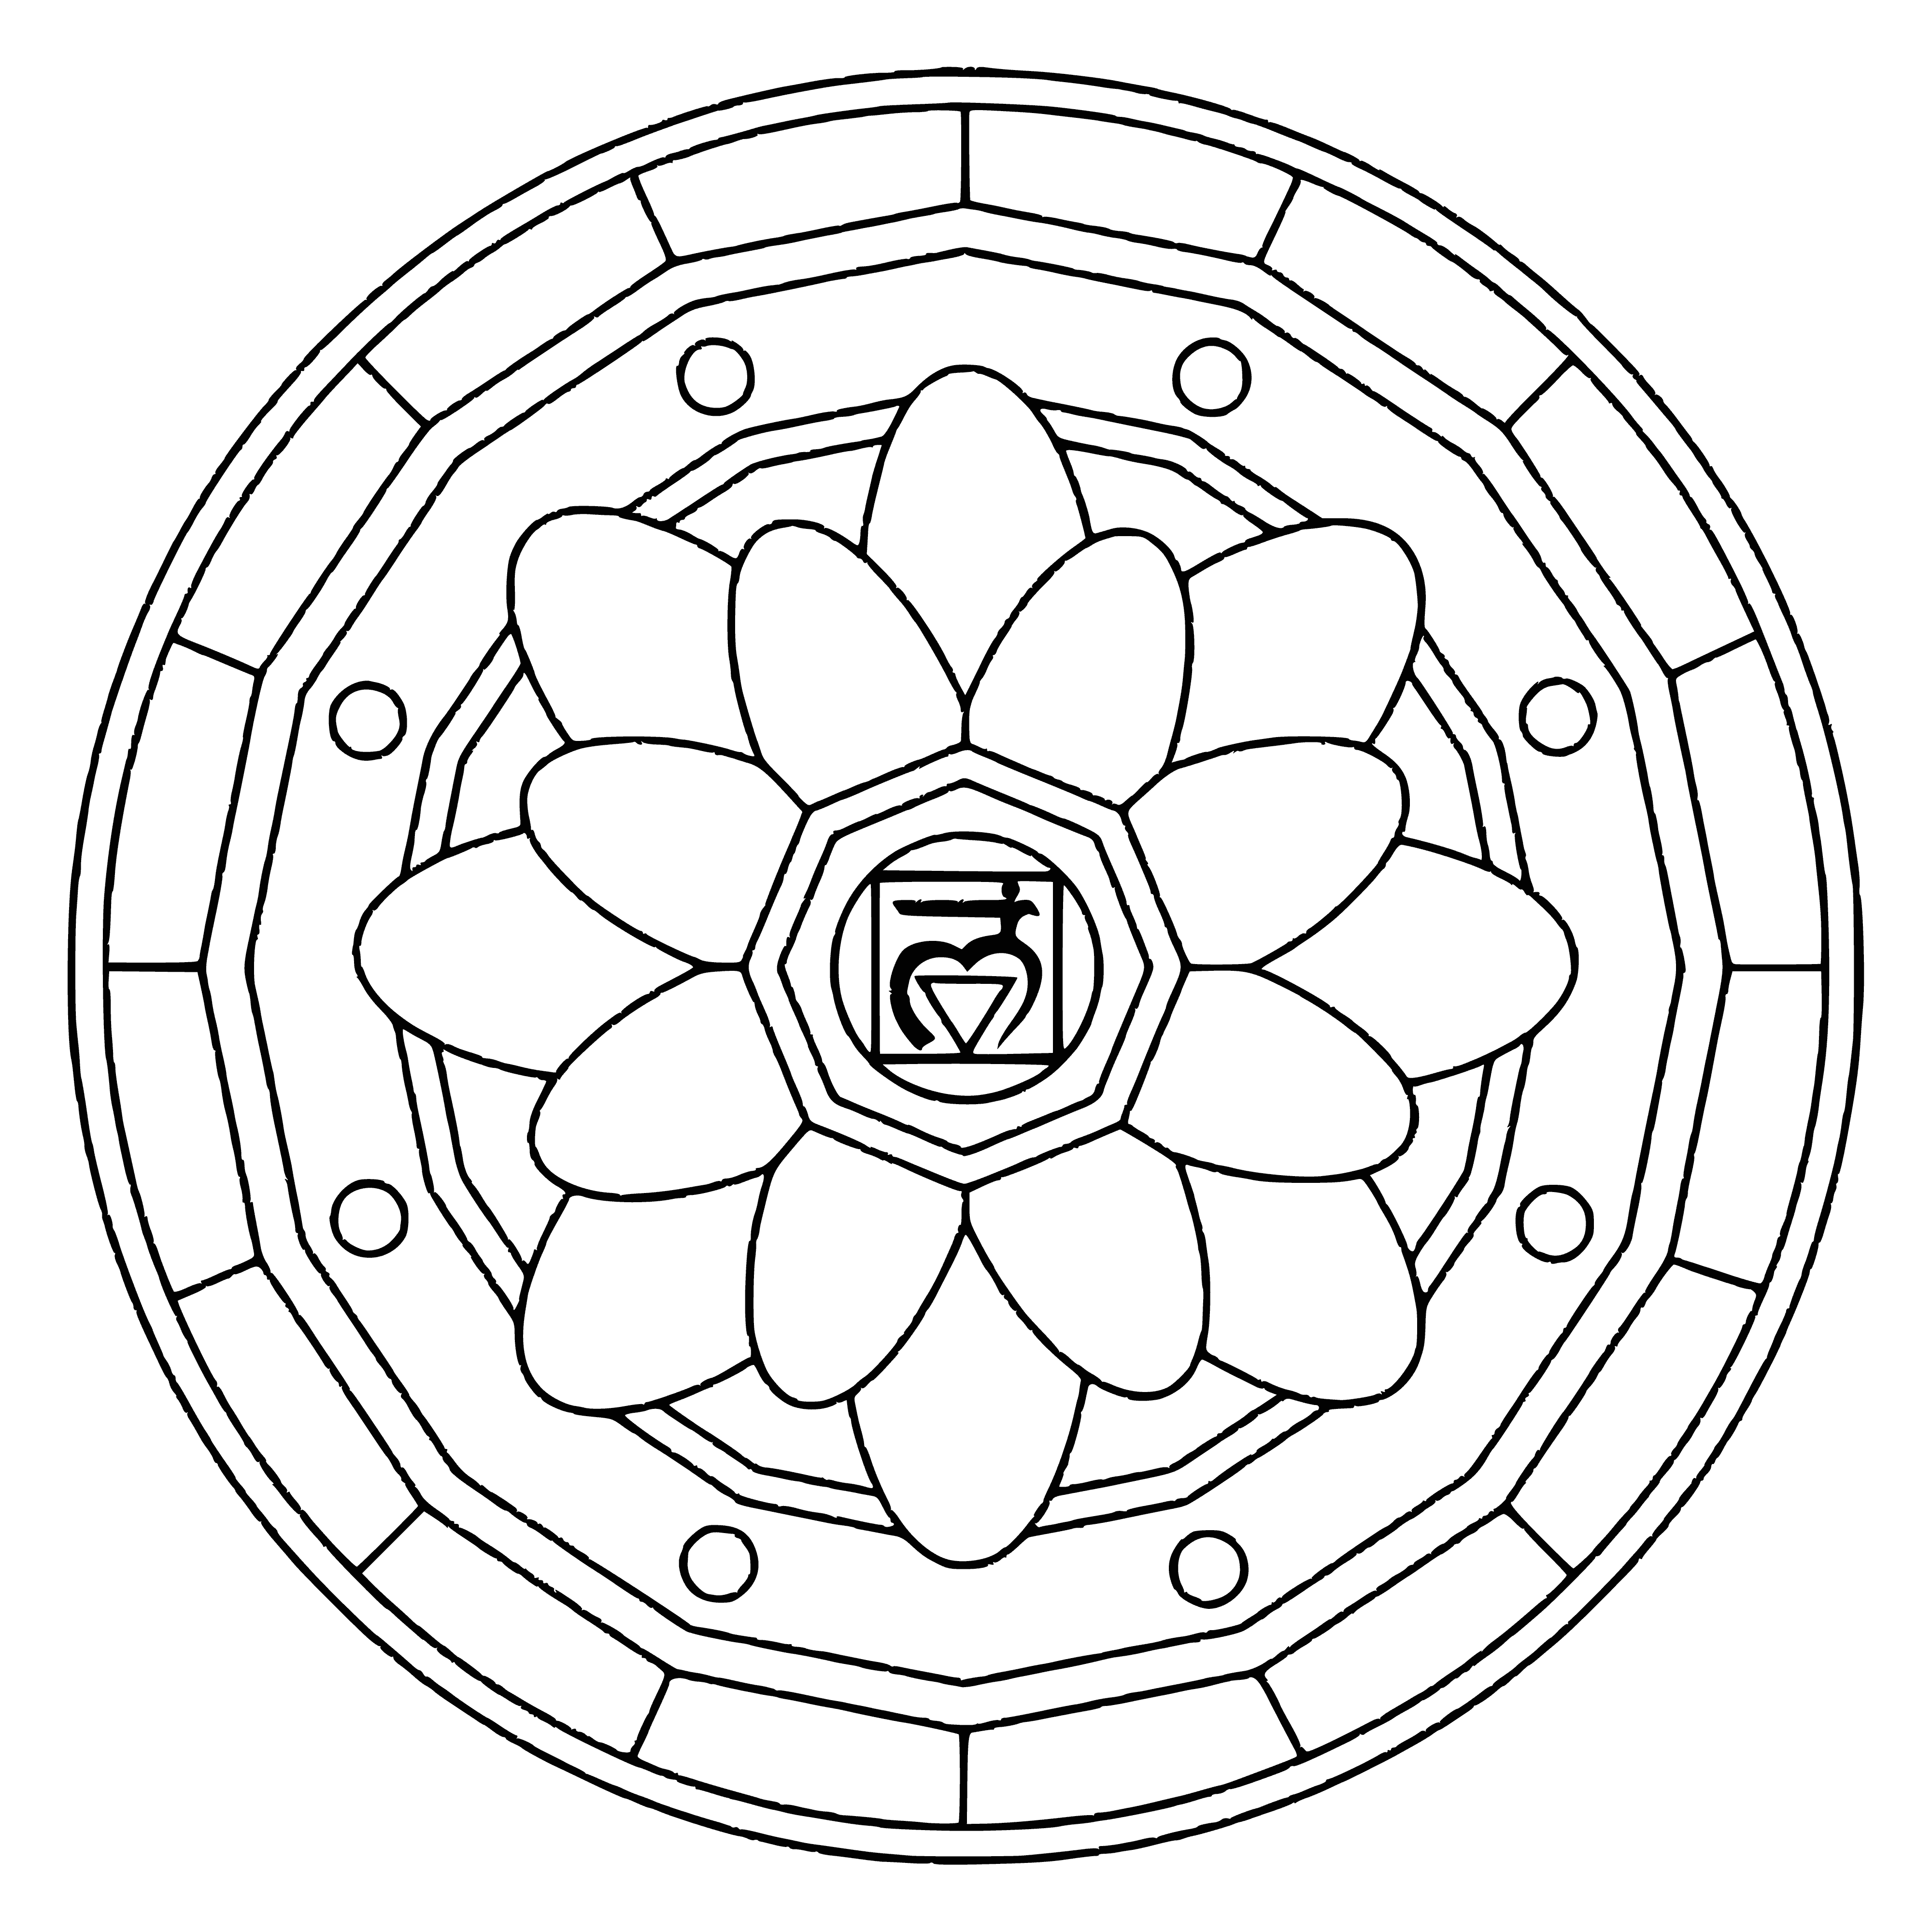 coloring page: Mandala with Muladhara symbol is a circular diagram, 8 circles rep chakras of different colors, with a center lotus of 4 colored petals.